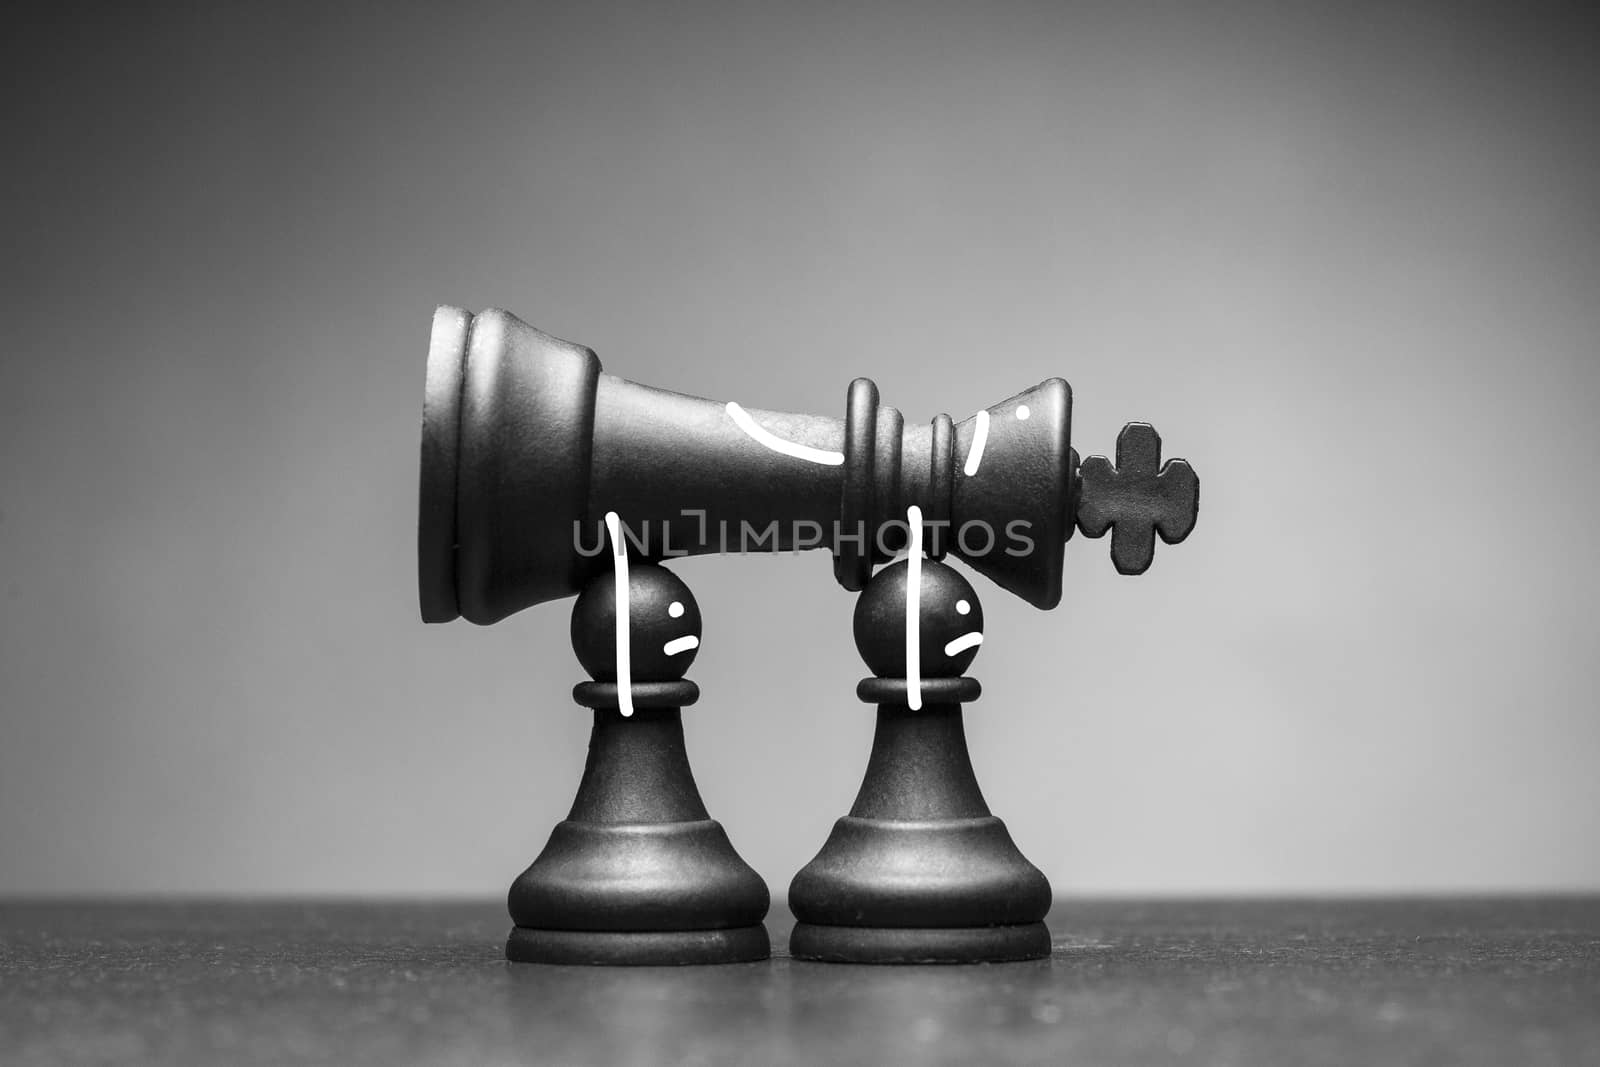 Two black pawn chess pieces carrying away a fallen king raised above their heads in a greyscale conceptual image